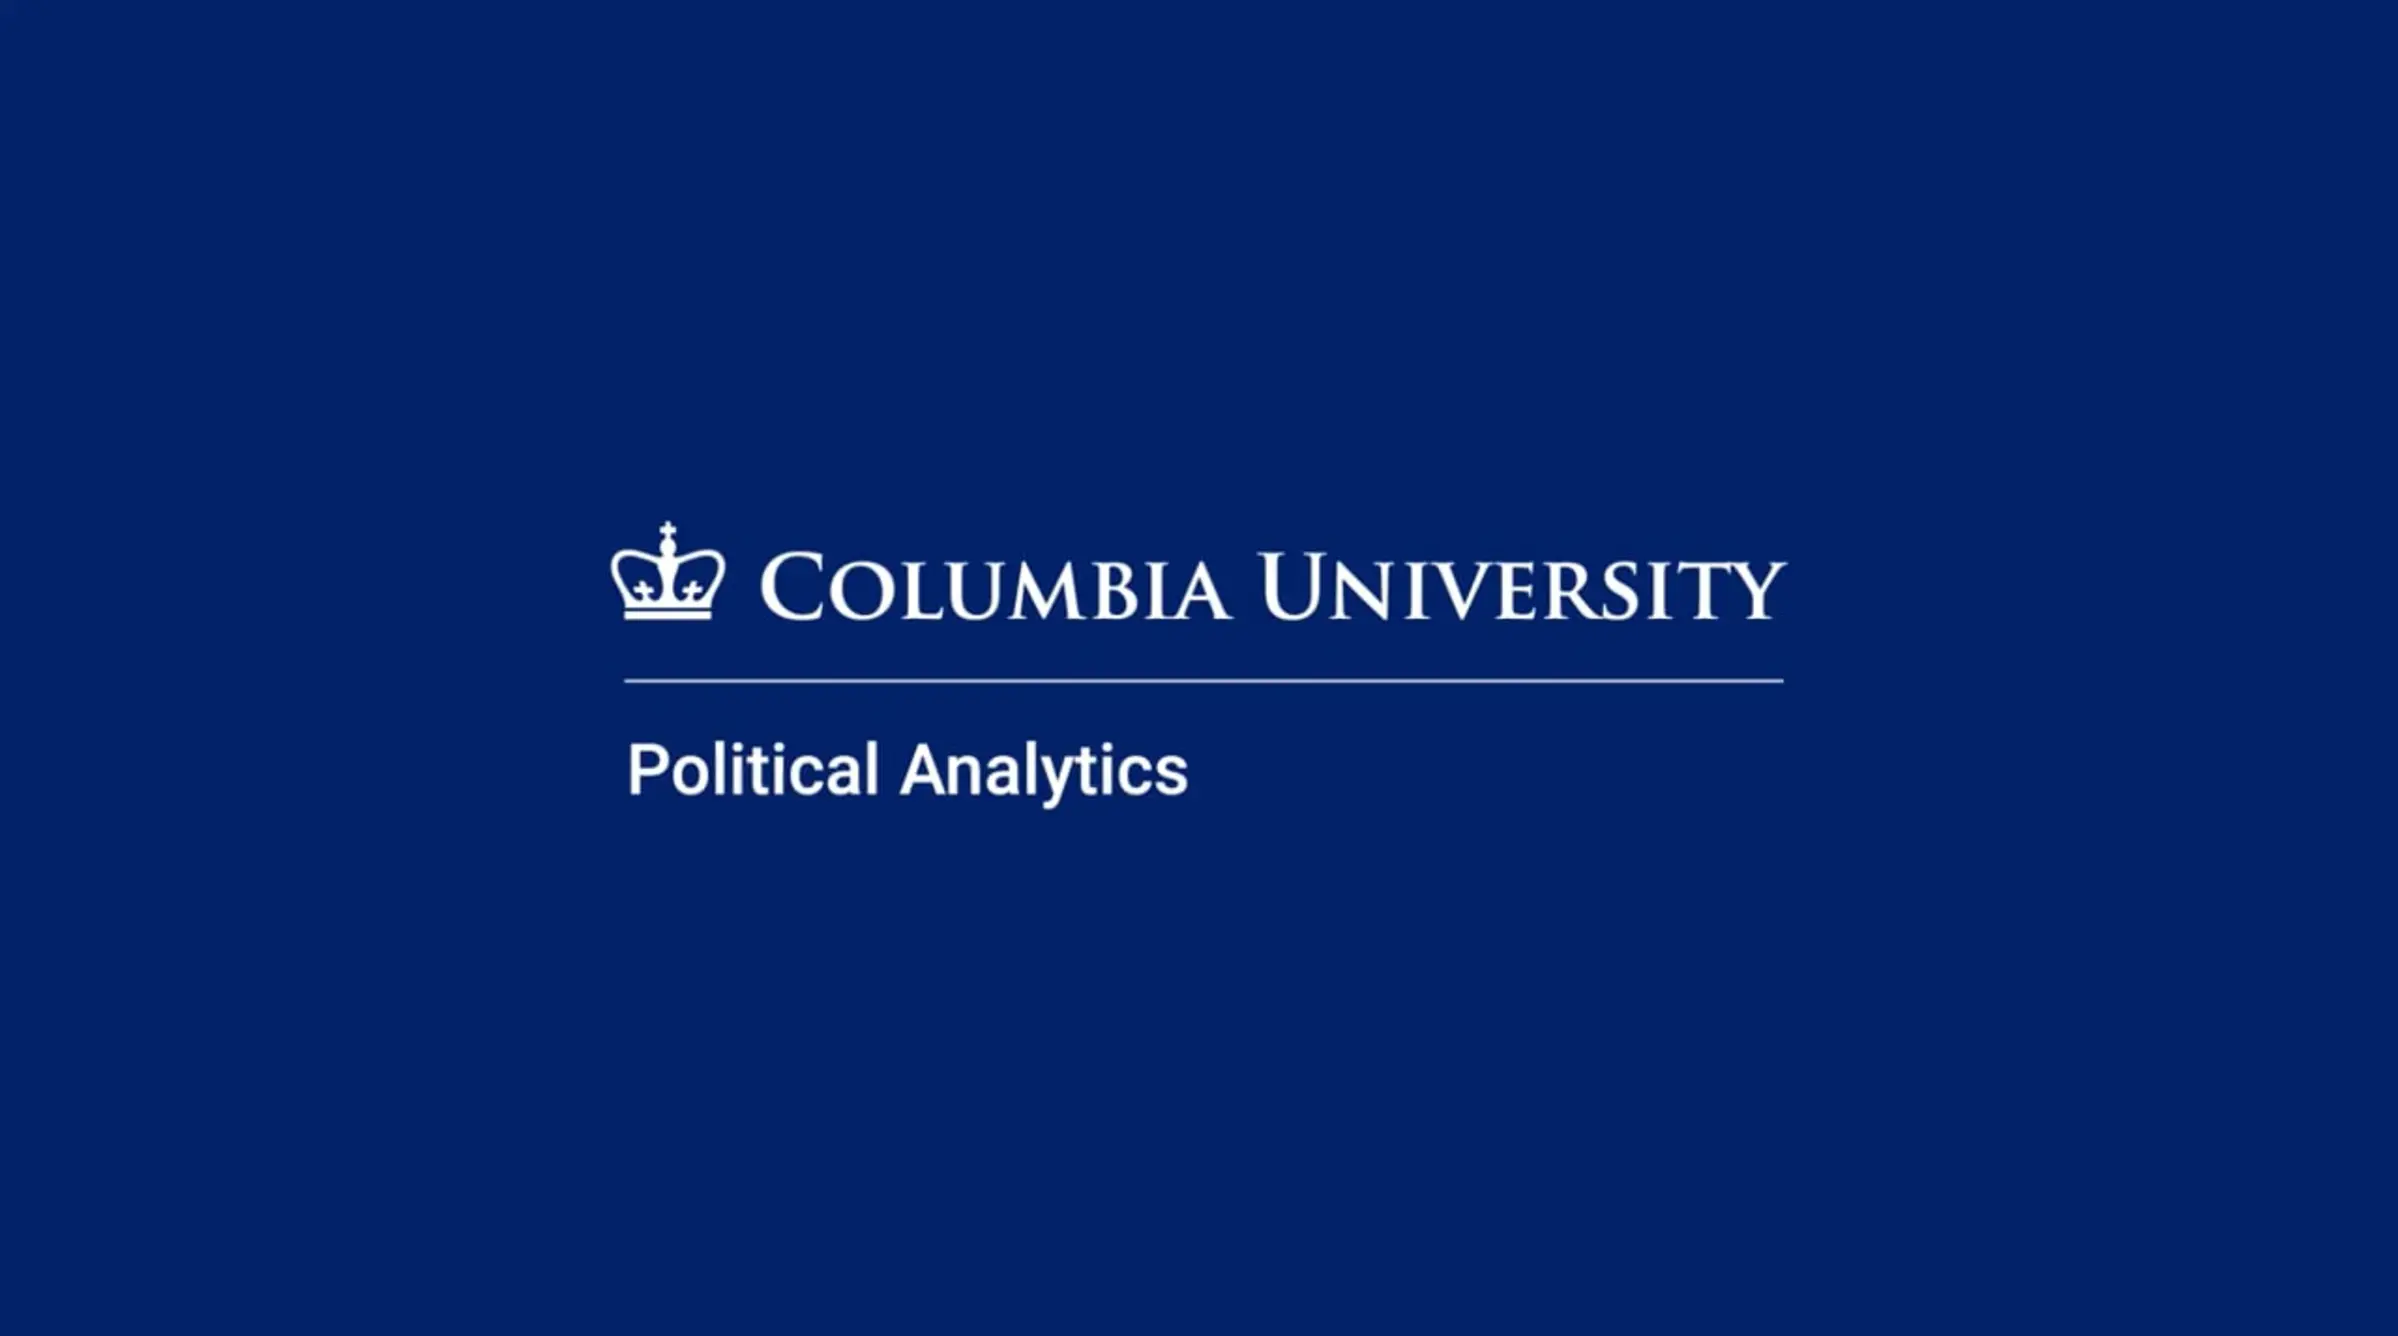 Announcing Political Science Professor Gregory J. Wawro as Program Director of the Columbia M.S. in Political Analytics